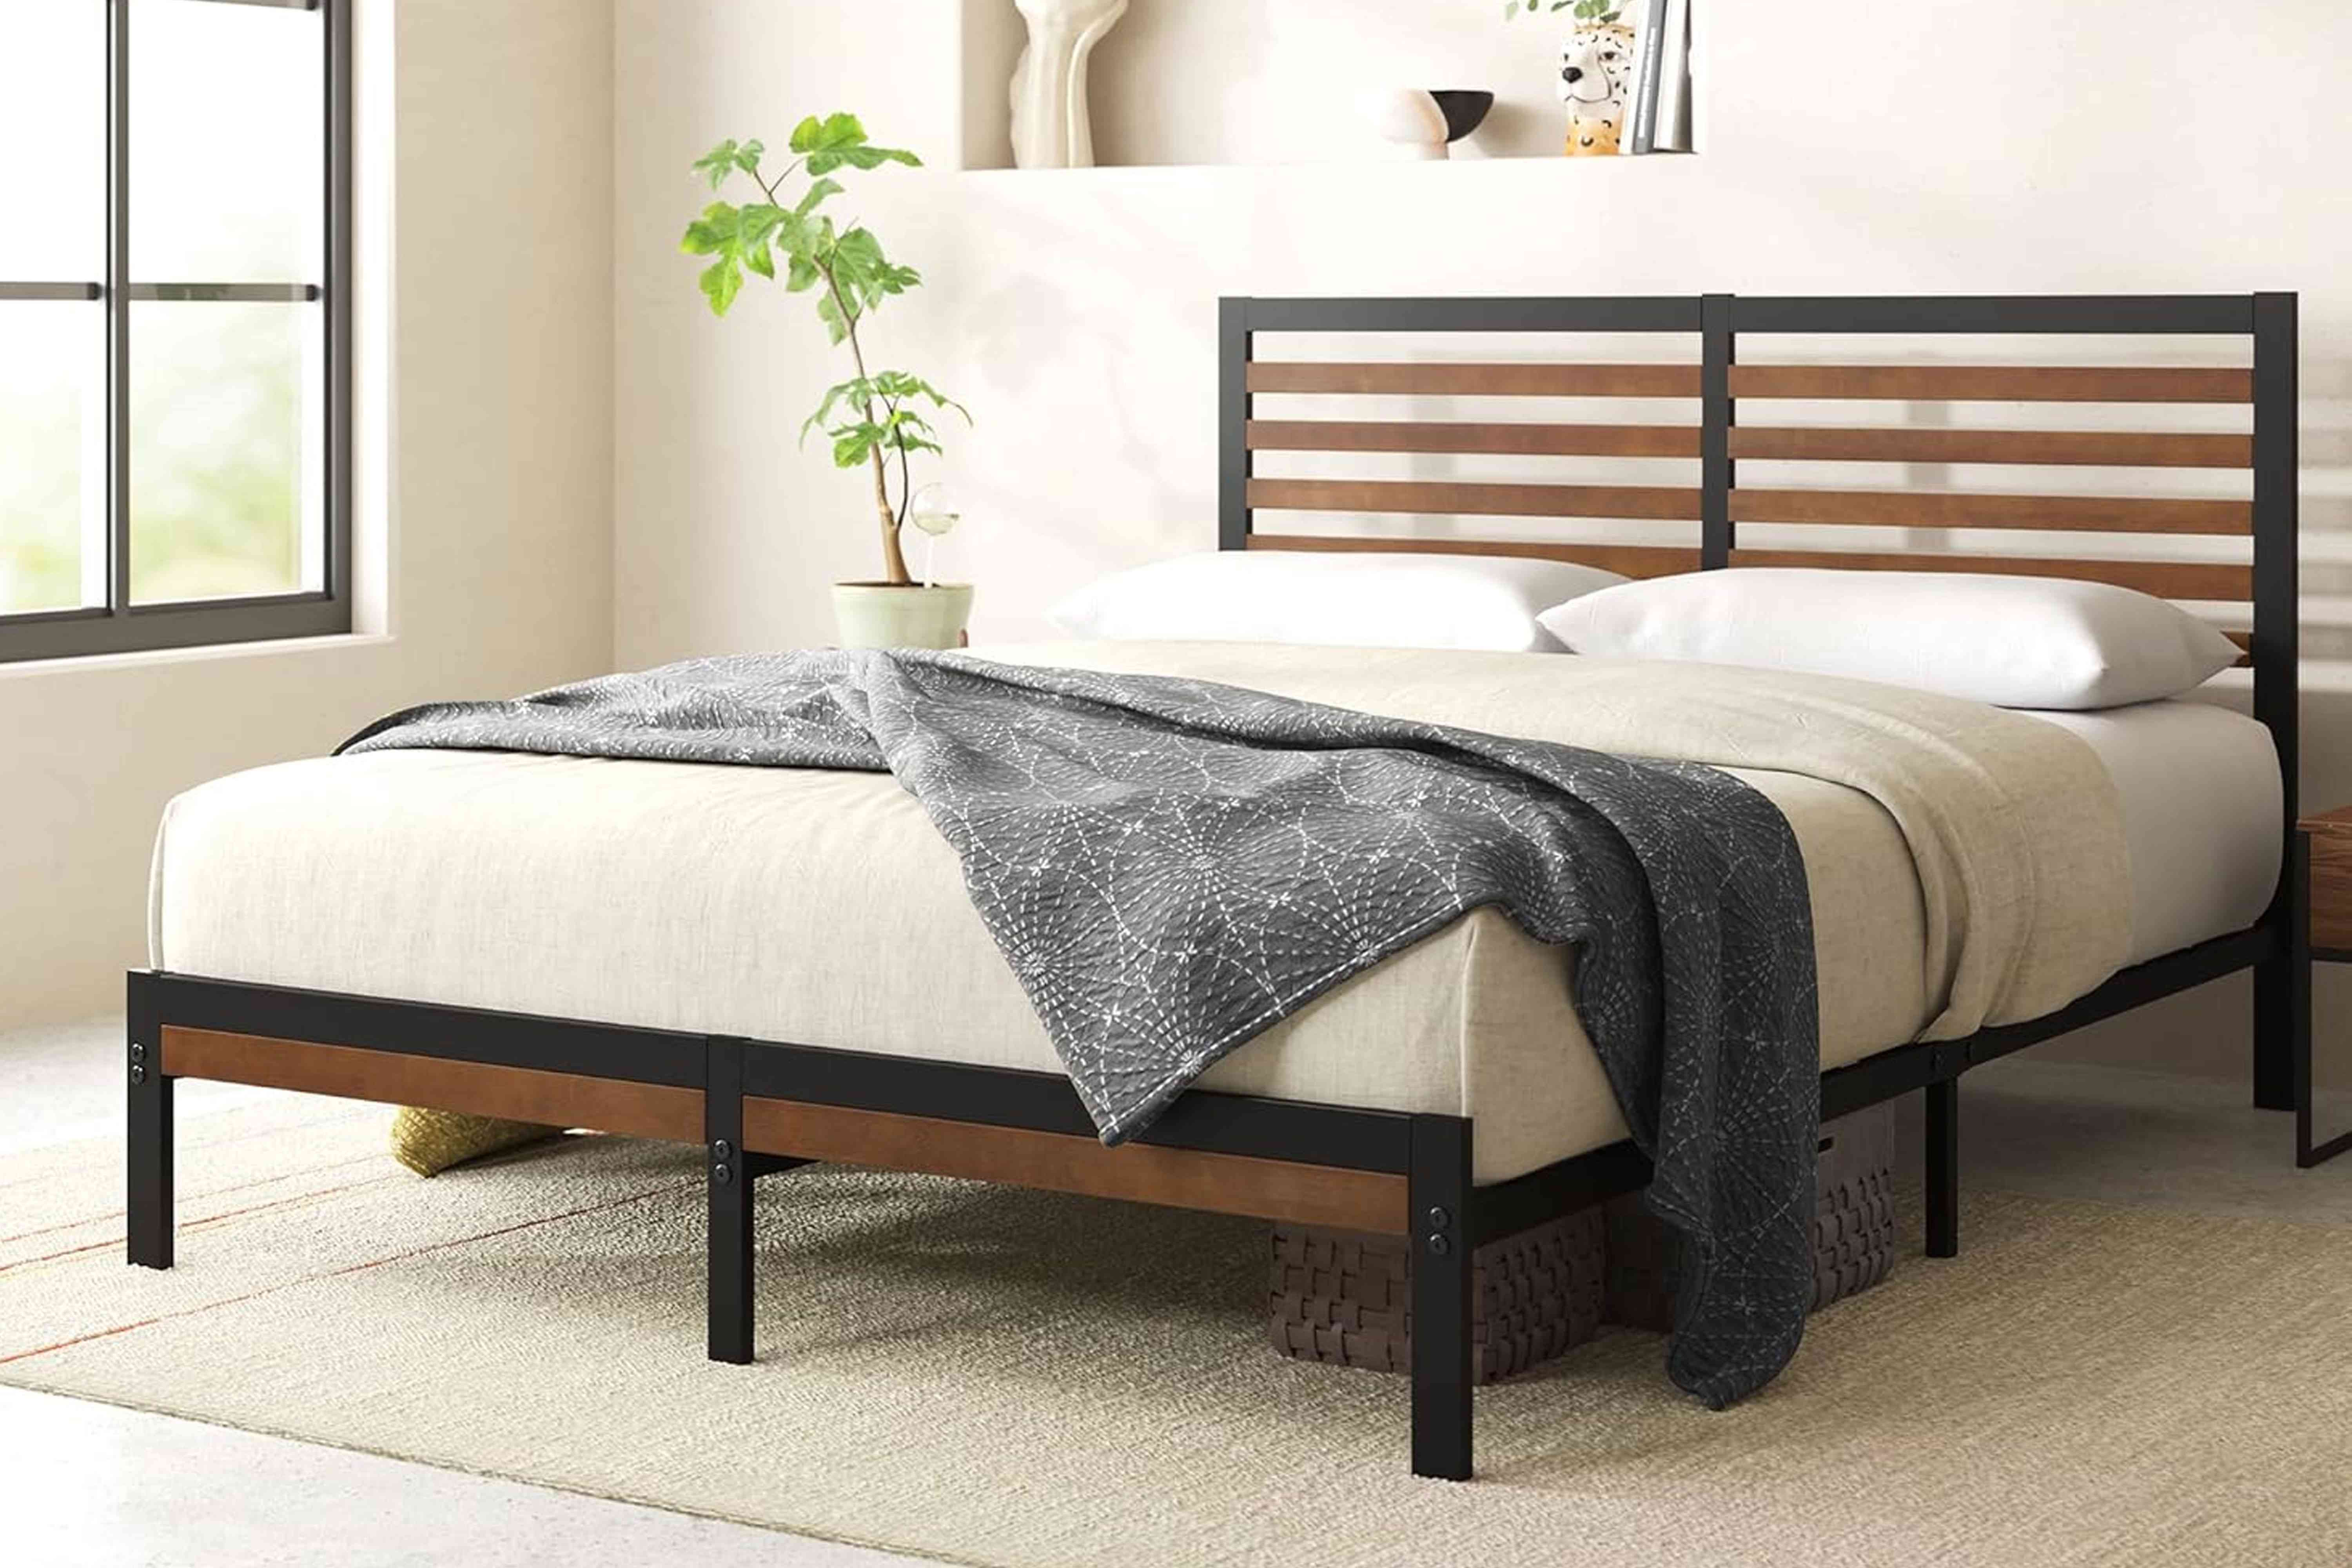 We Found the Best Bedroom Furniture Deals Happening at Amazon Right Now, and Prices Start at $18